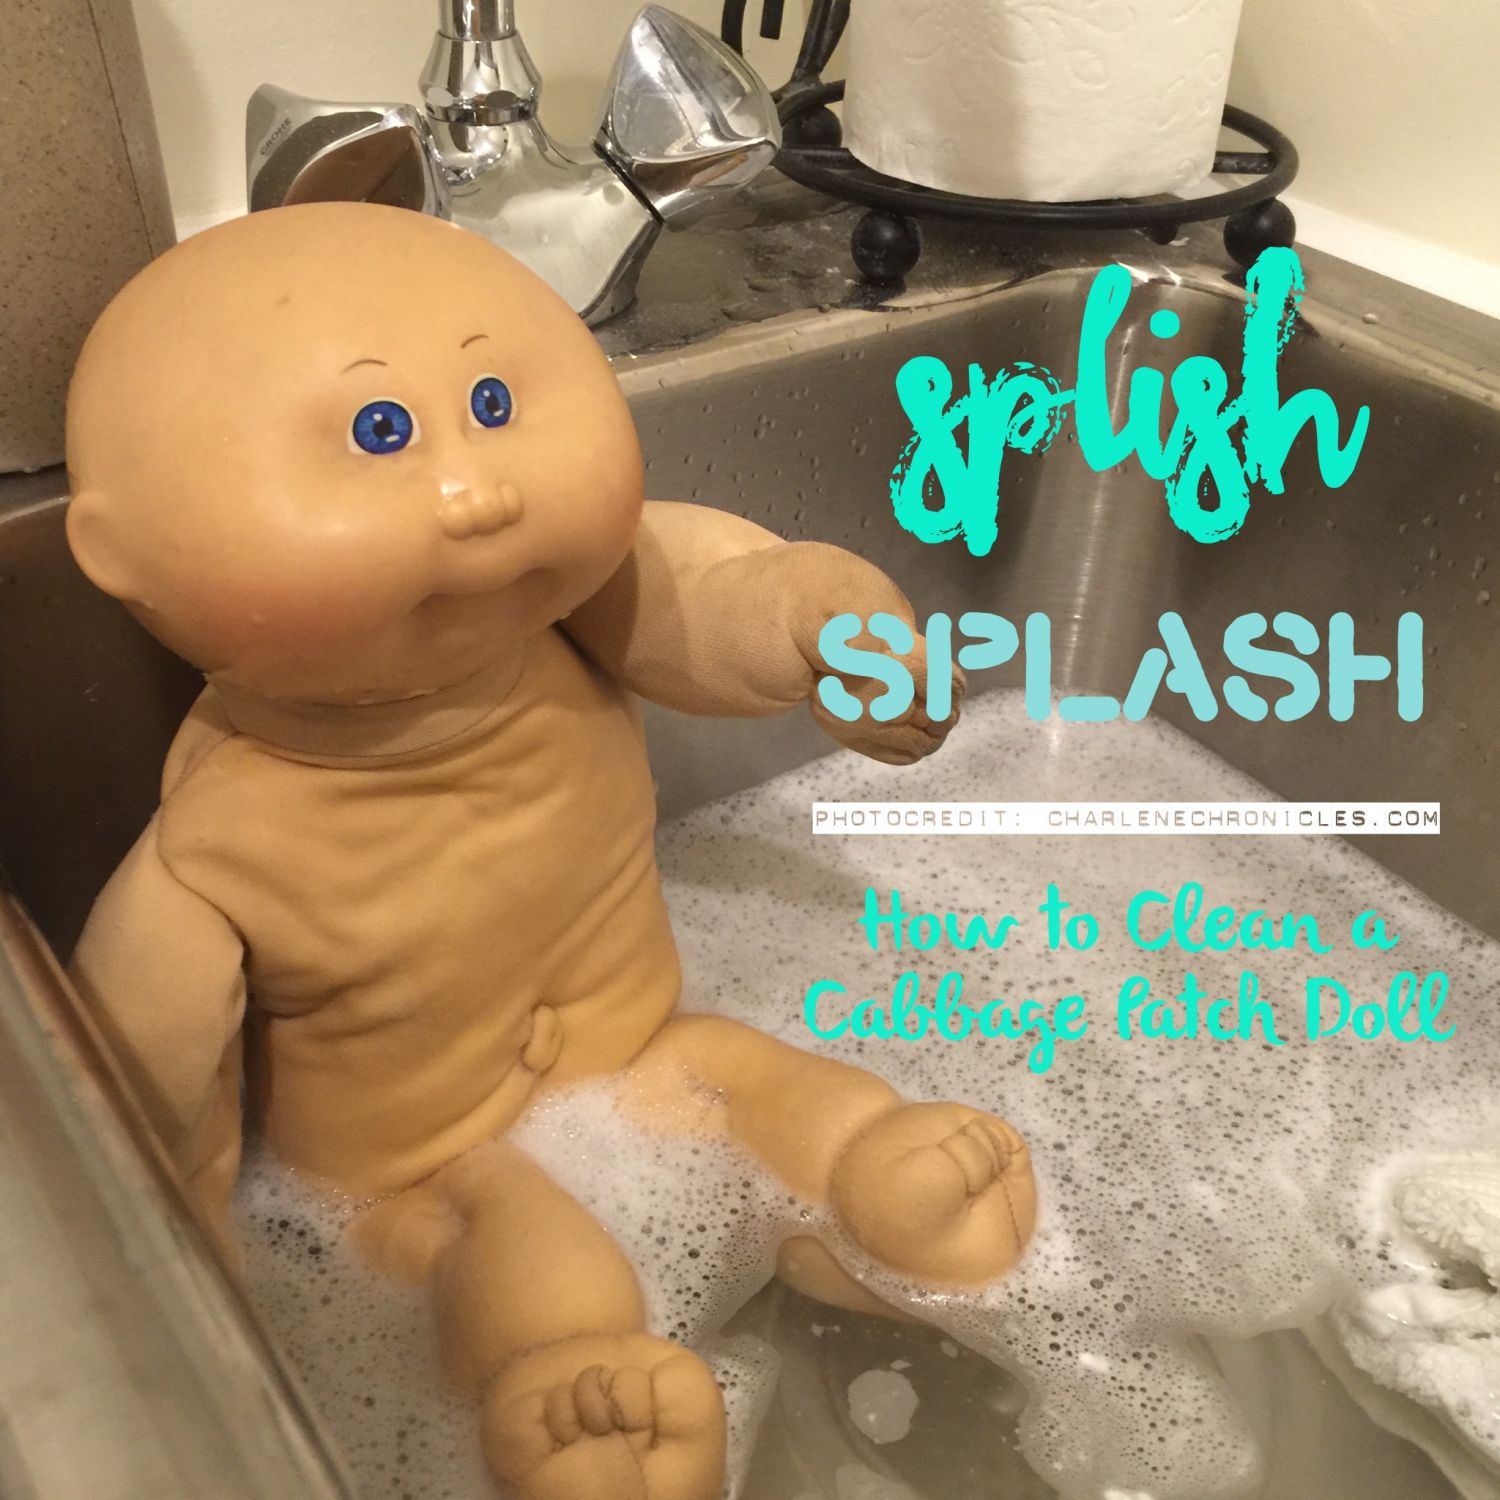 washing cabbage patch dolls